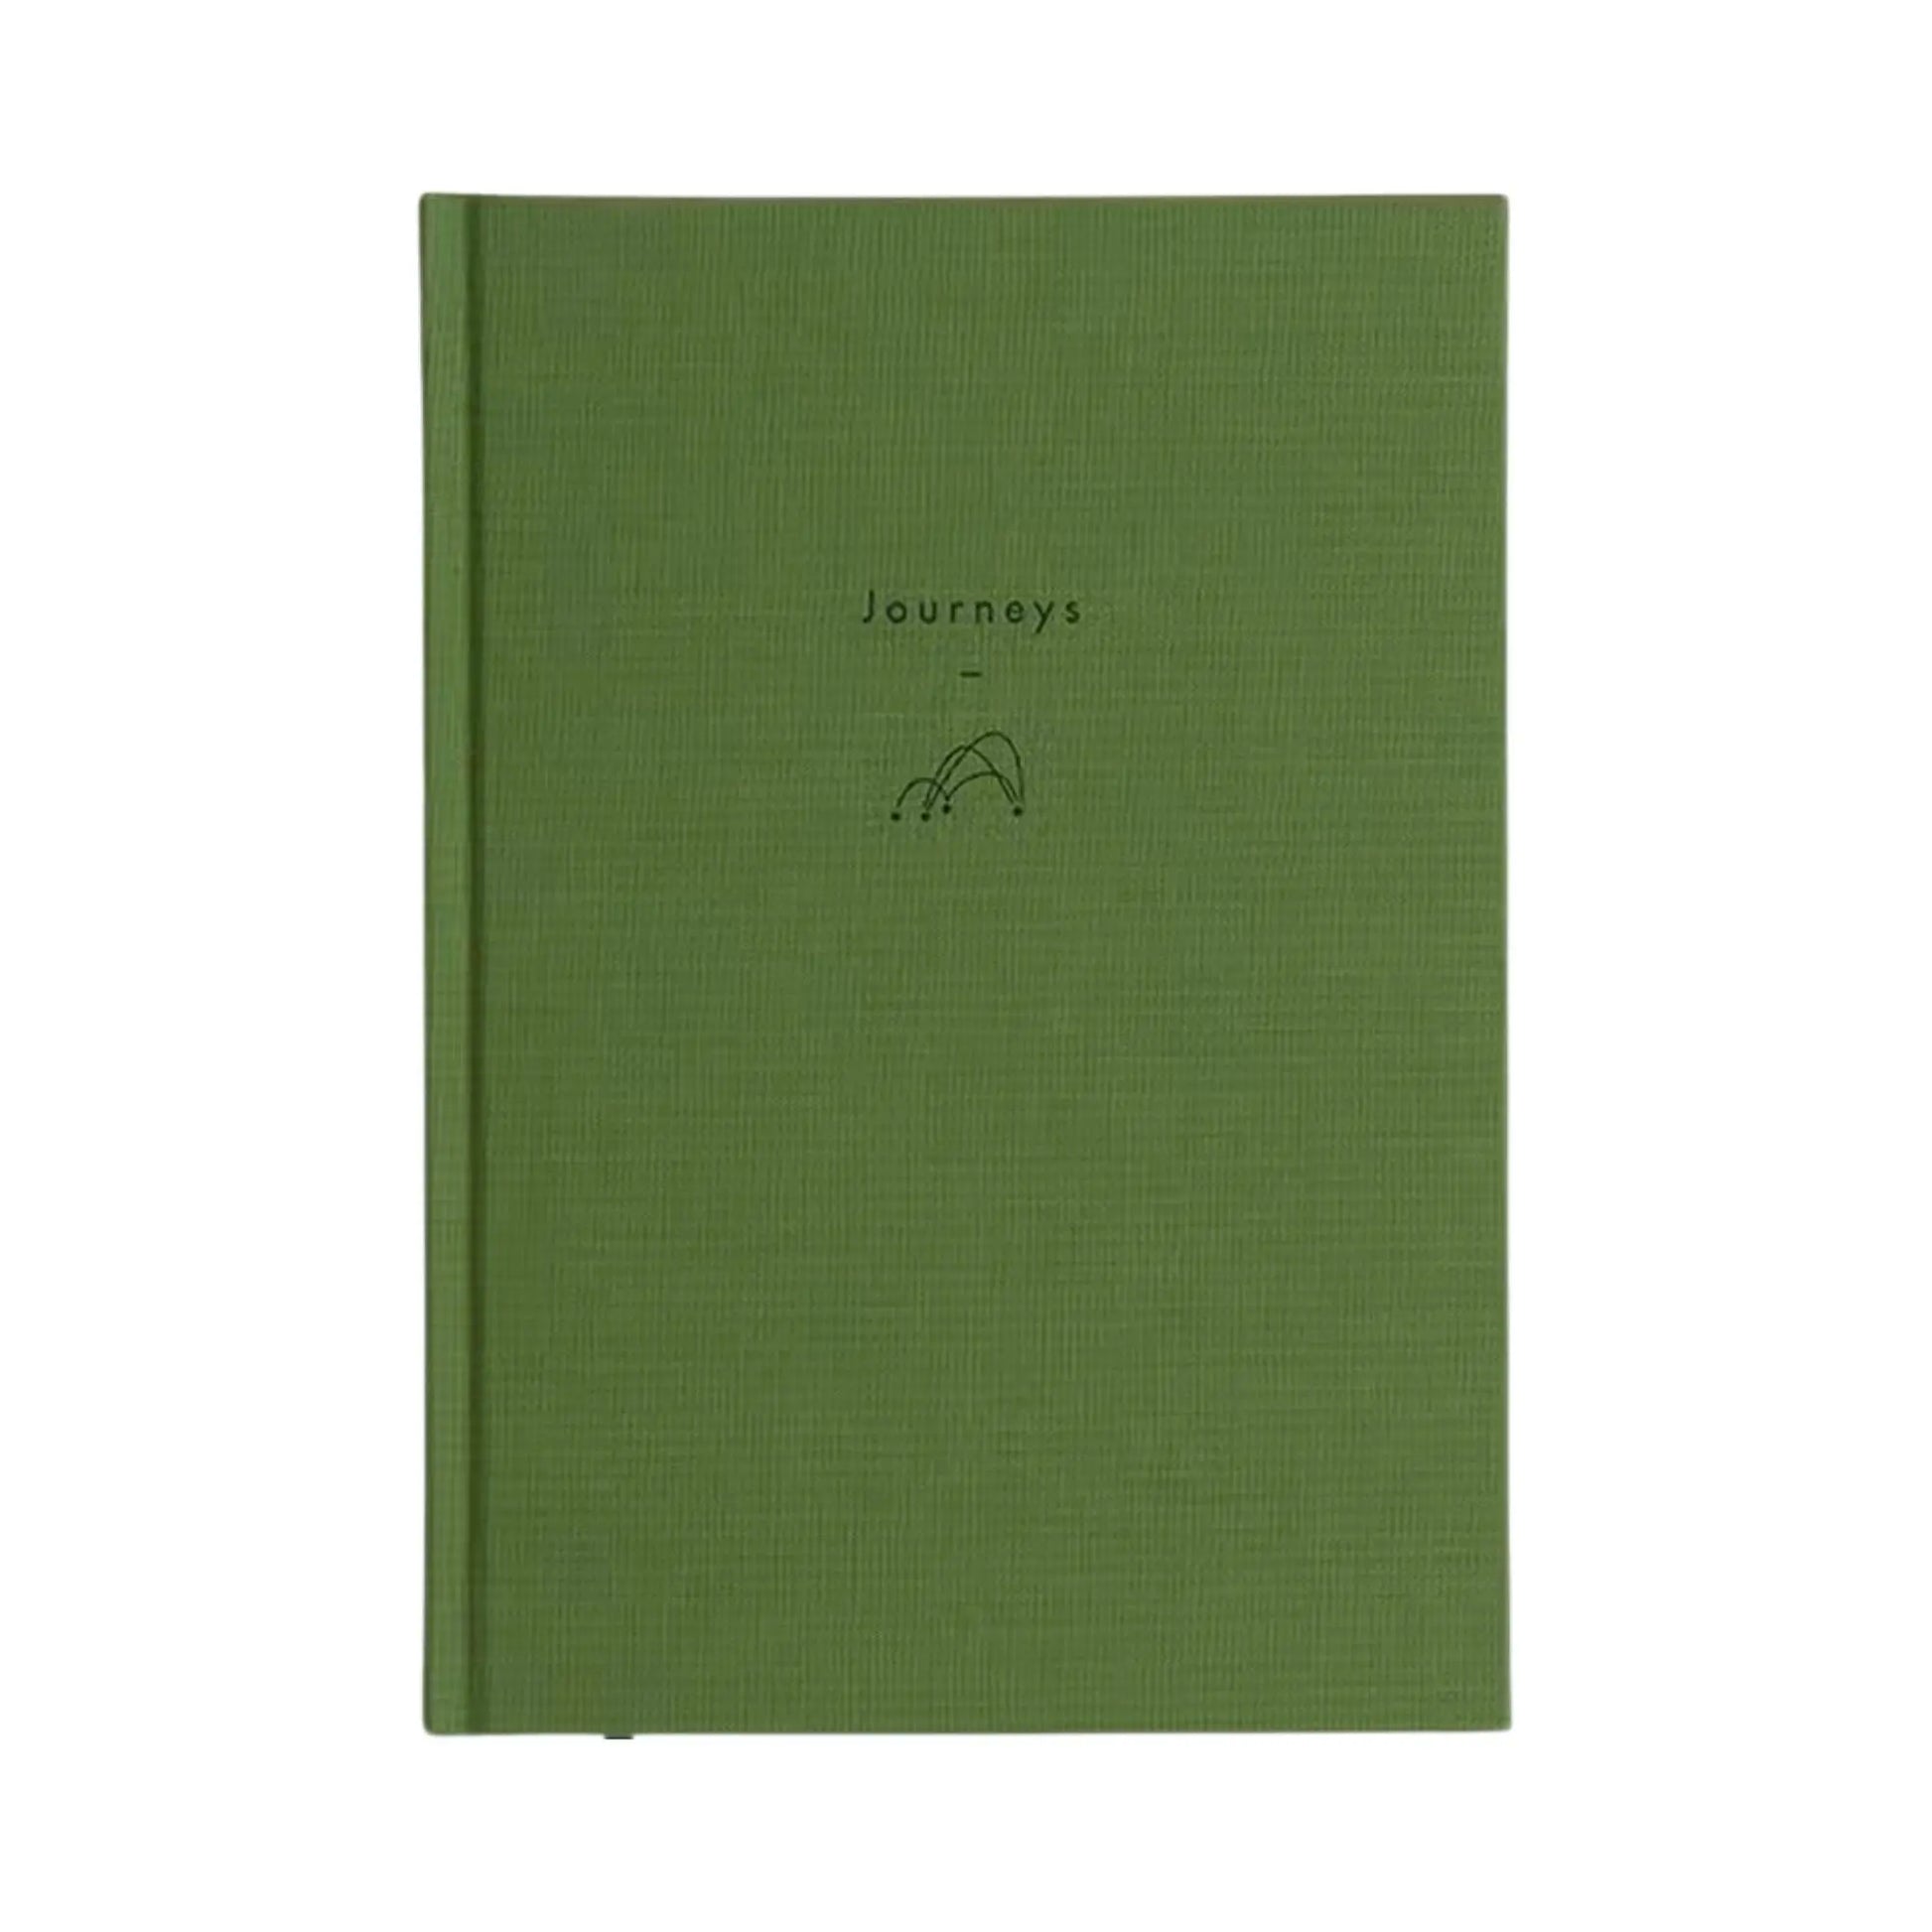 Buy The School of Life Writing as Therapy: Journeys Notebook - Green | Notebookss at Woven Durham